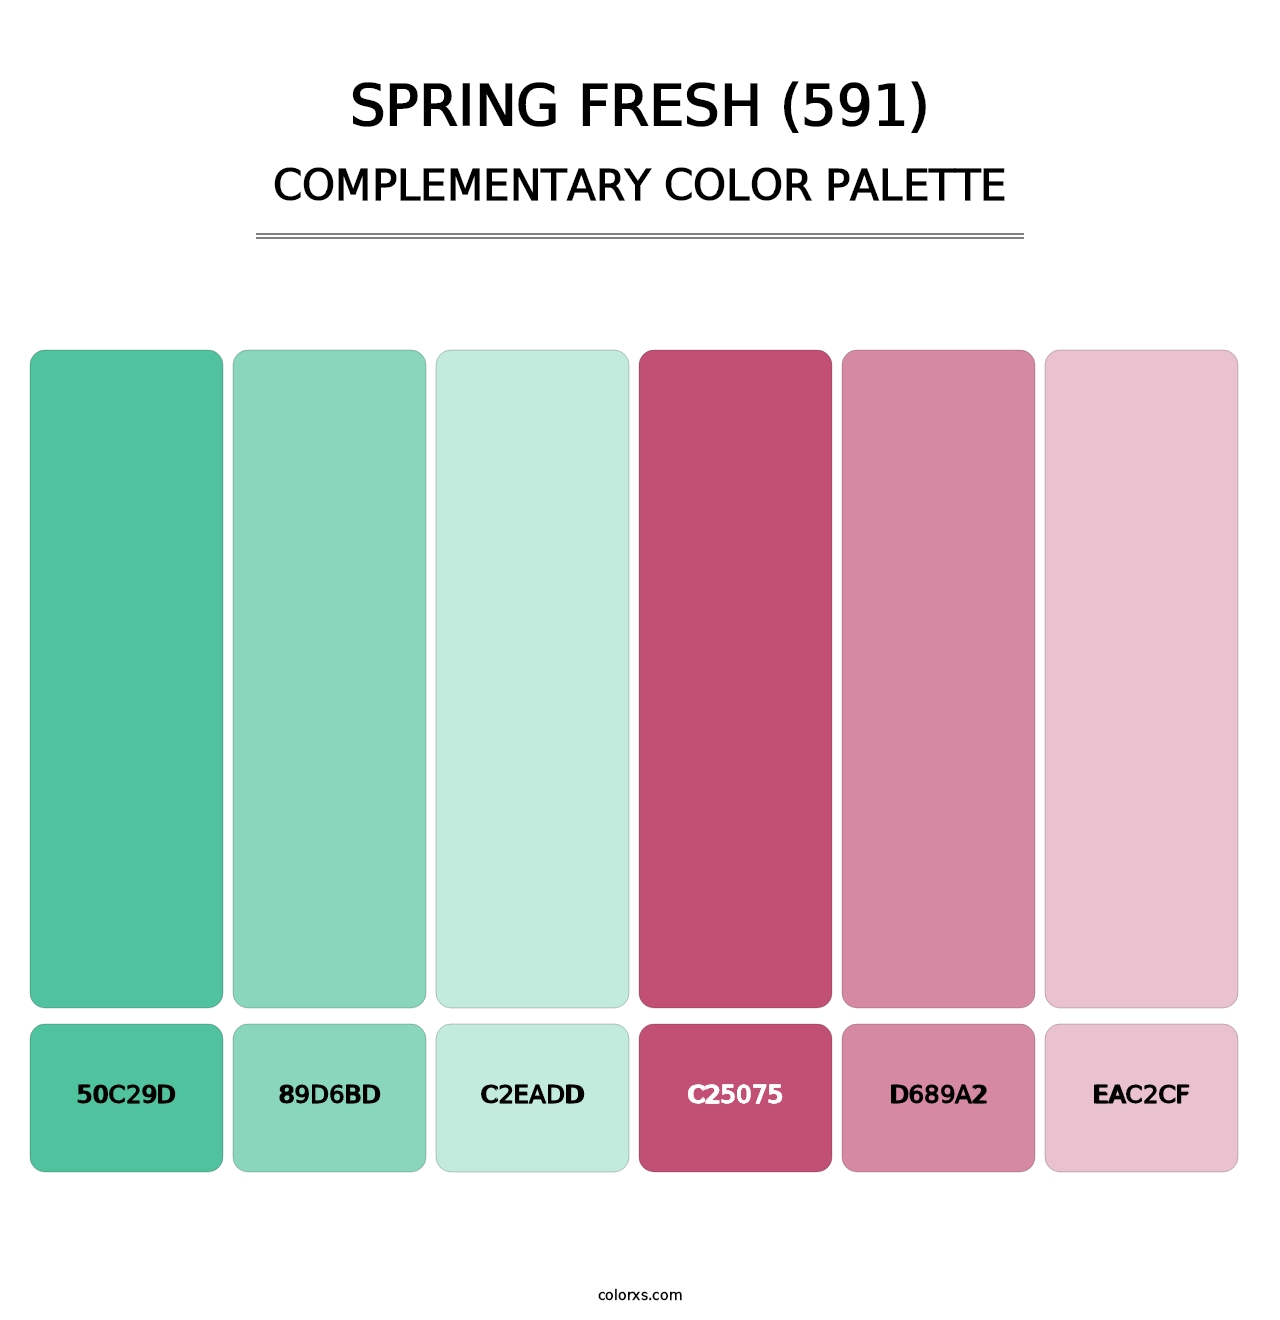 Spring Fresh (591) - Complementary Color Palette